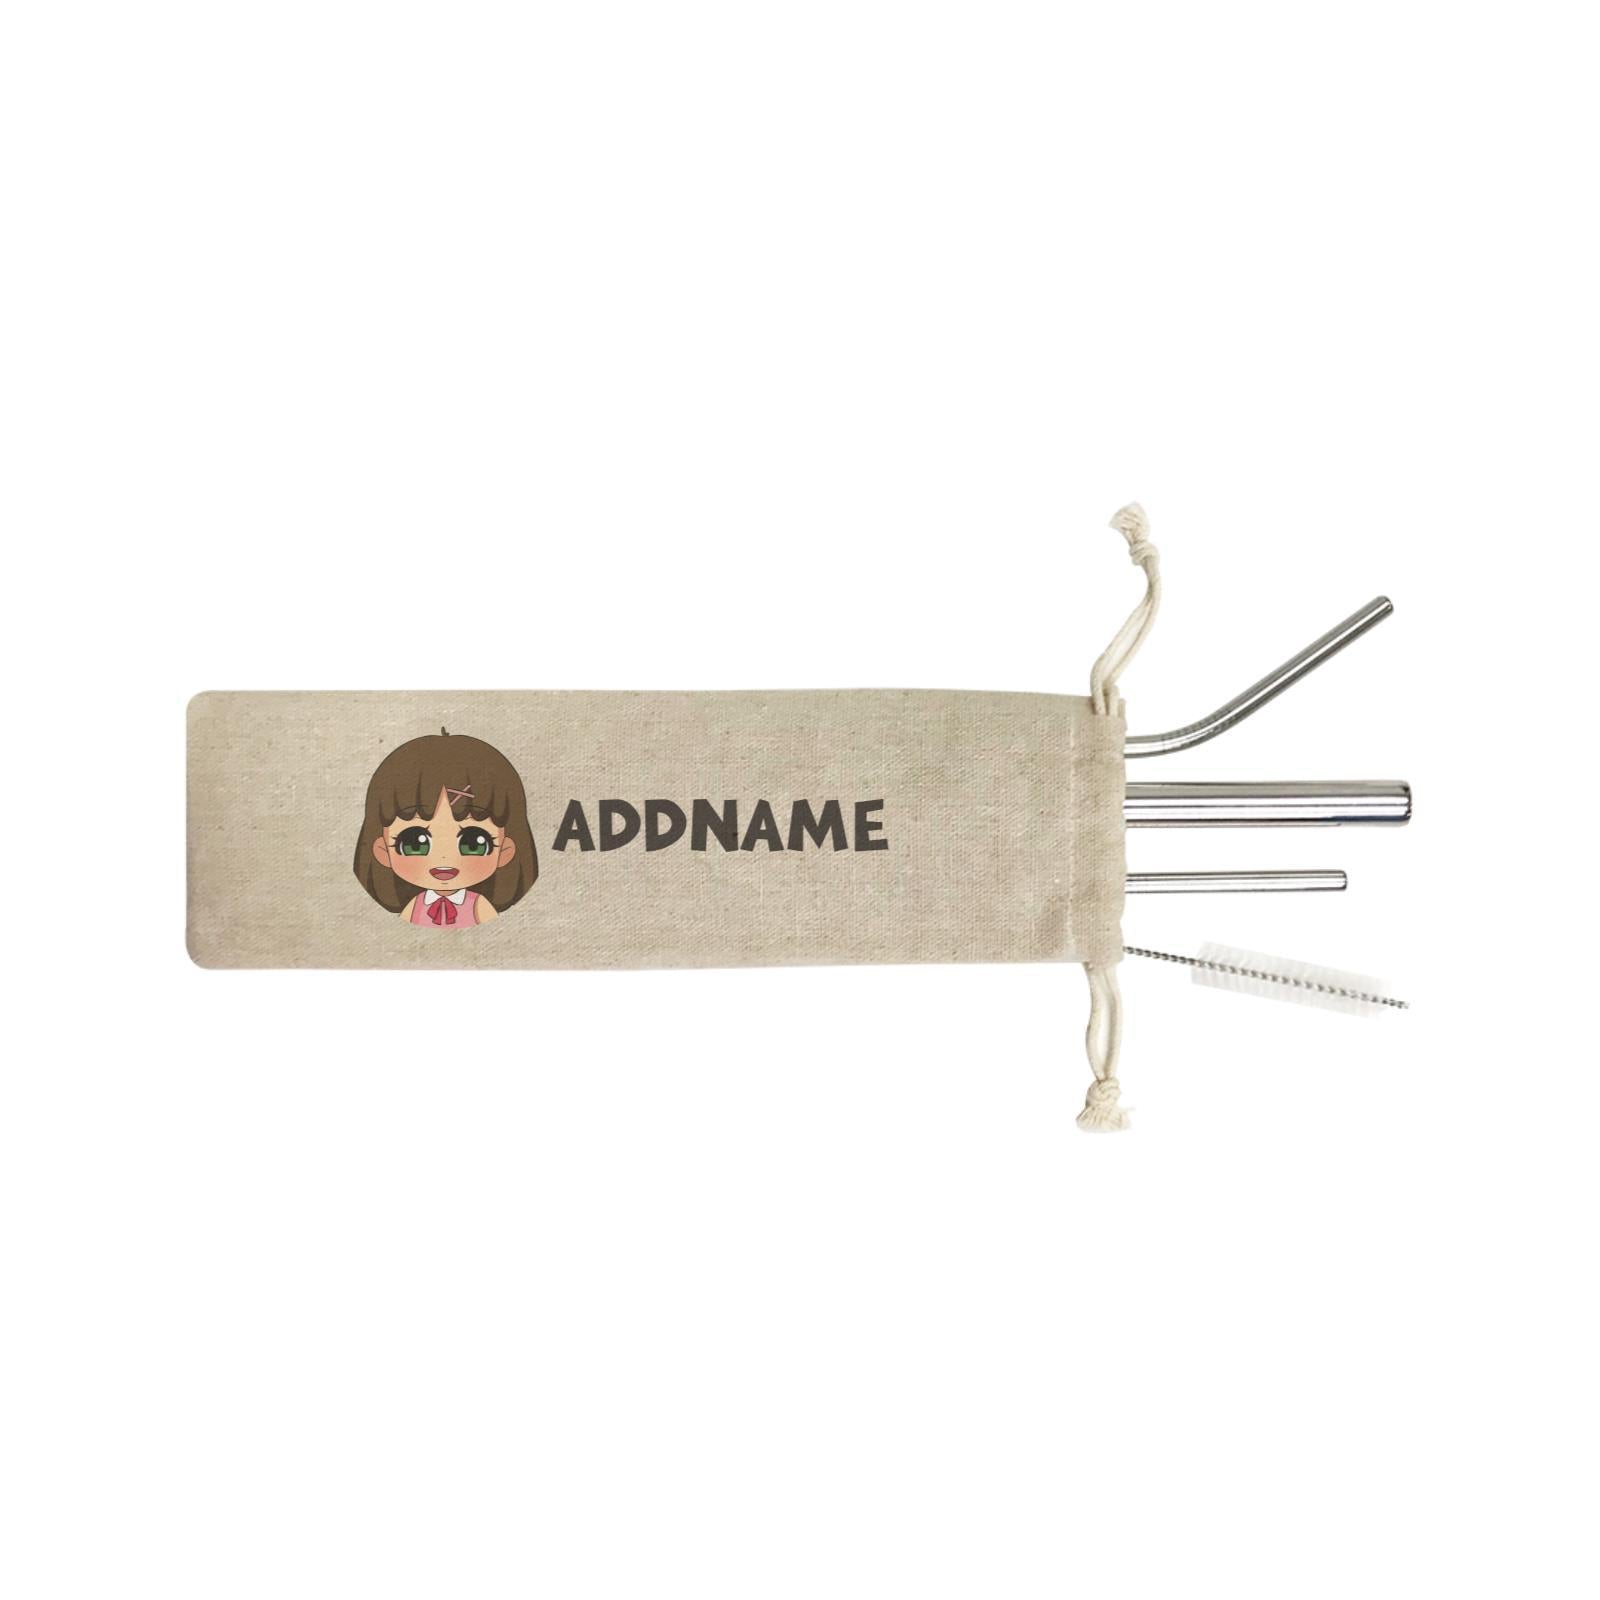 Children's Day Gift Series Little Chinese Girl Addname SB 4-in-1 Stainless Steel Straw Set In a Satchel